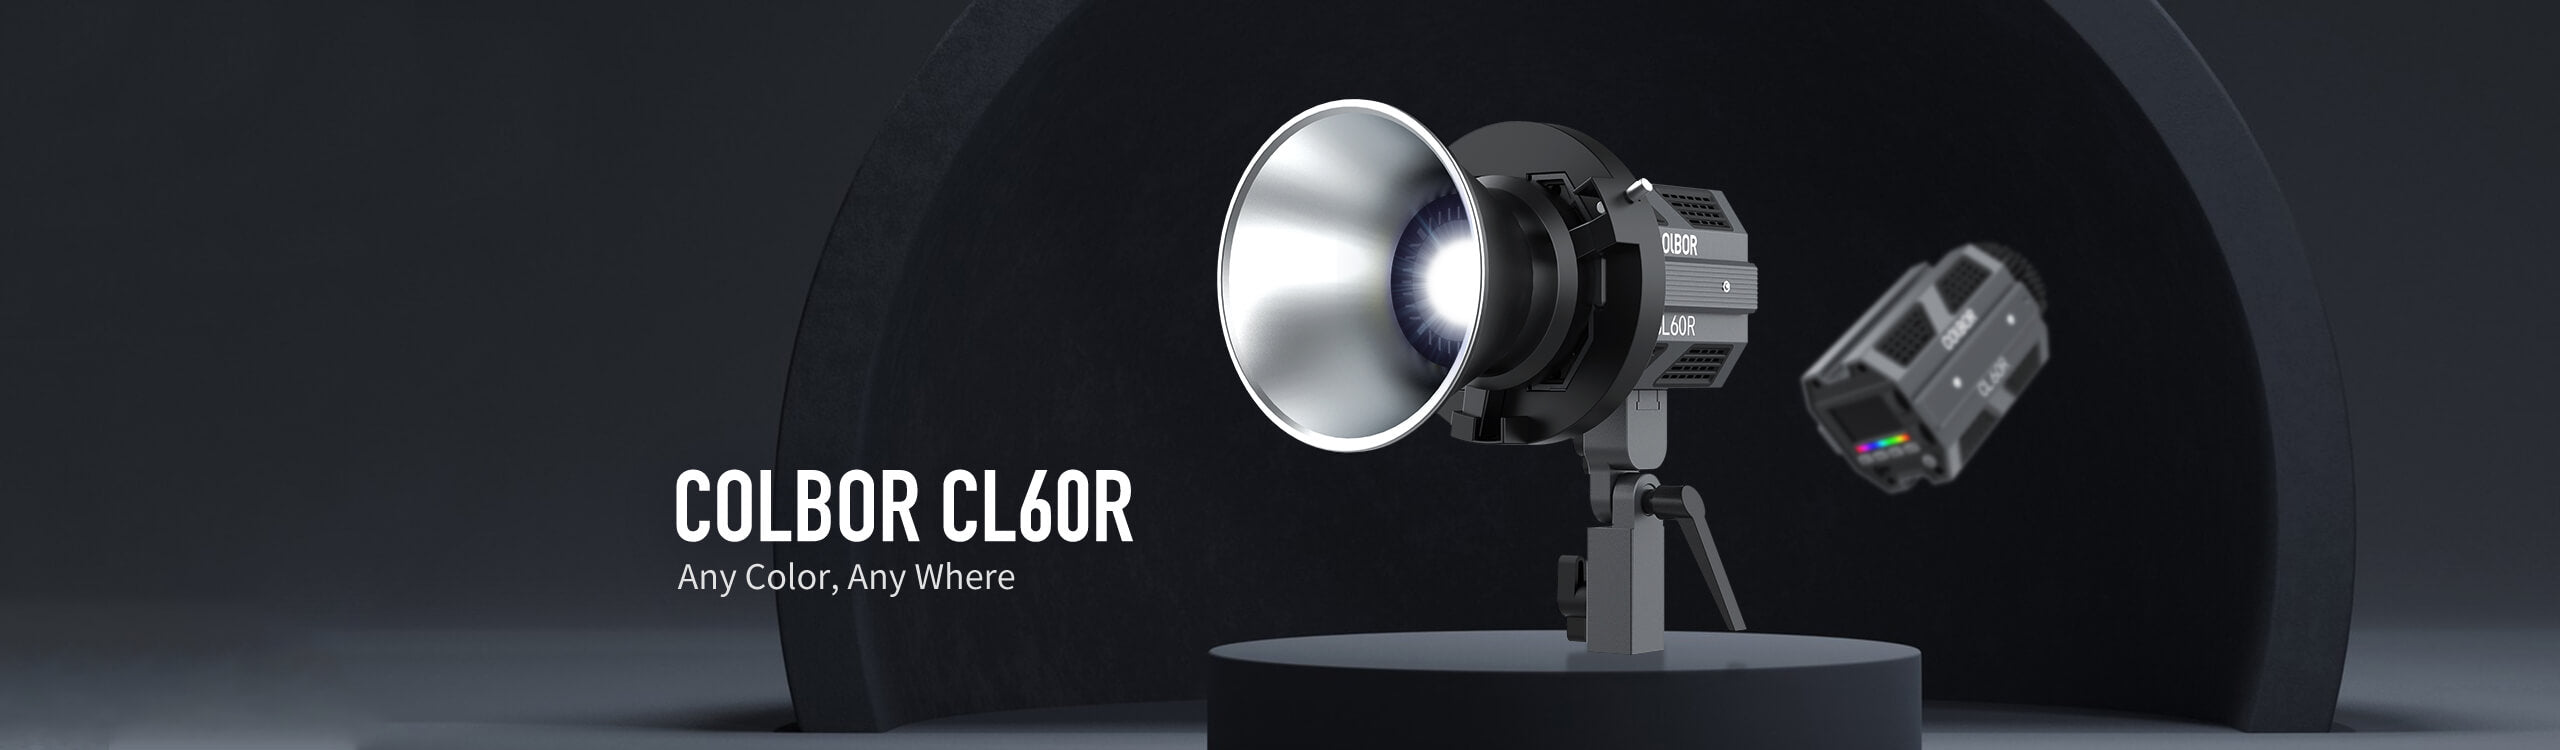 COLBOR CL60R RGB LED light comes with a Bowen-mount adapter, a reflector, and a light base.